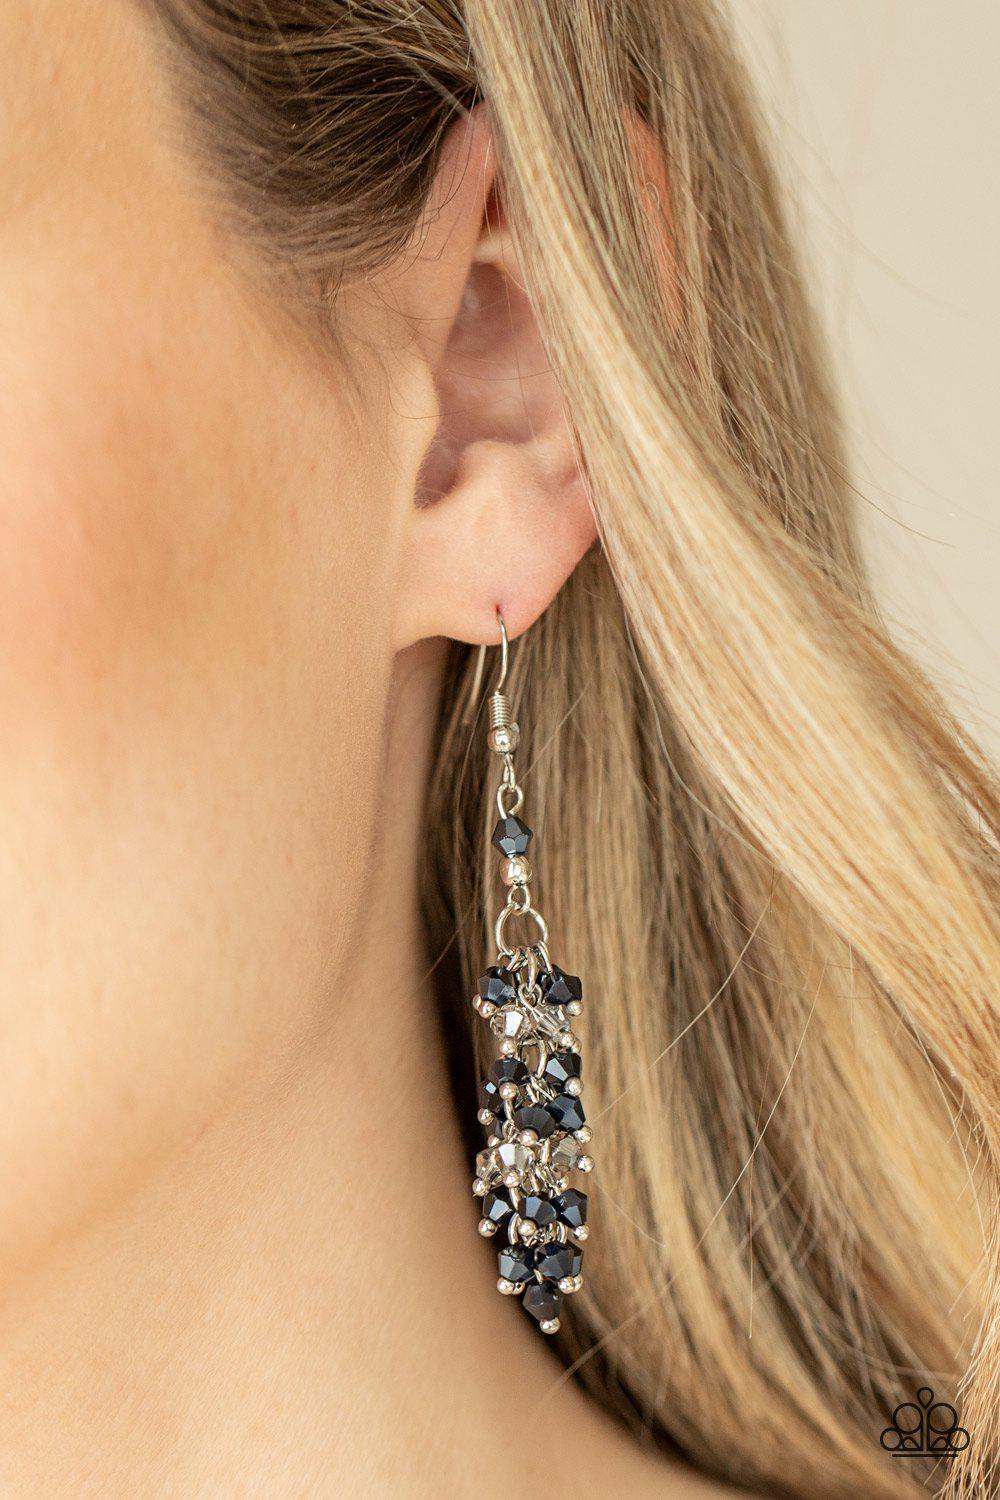 Celestial Chandeliers Blue Iridescent Earrings - Paparazzi Accessories- model - CarasShop.com - $5 Jewelry by Cara Jewels